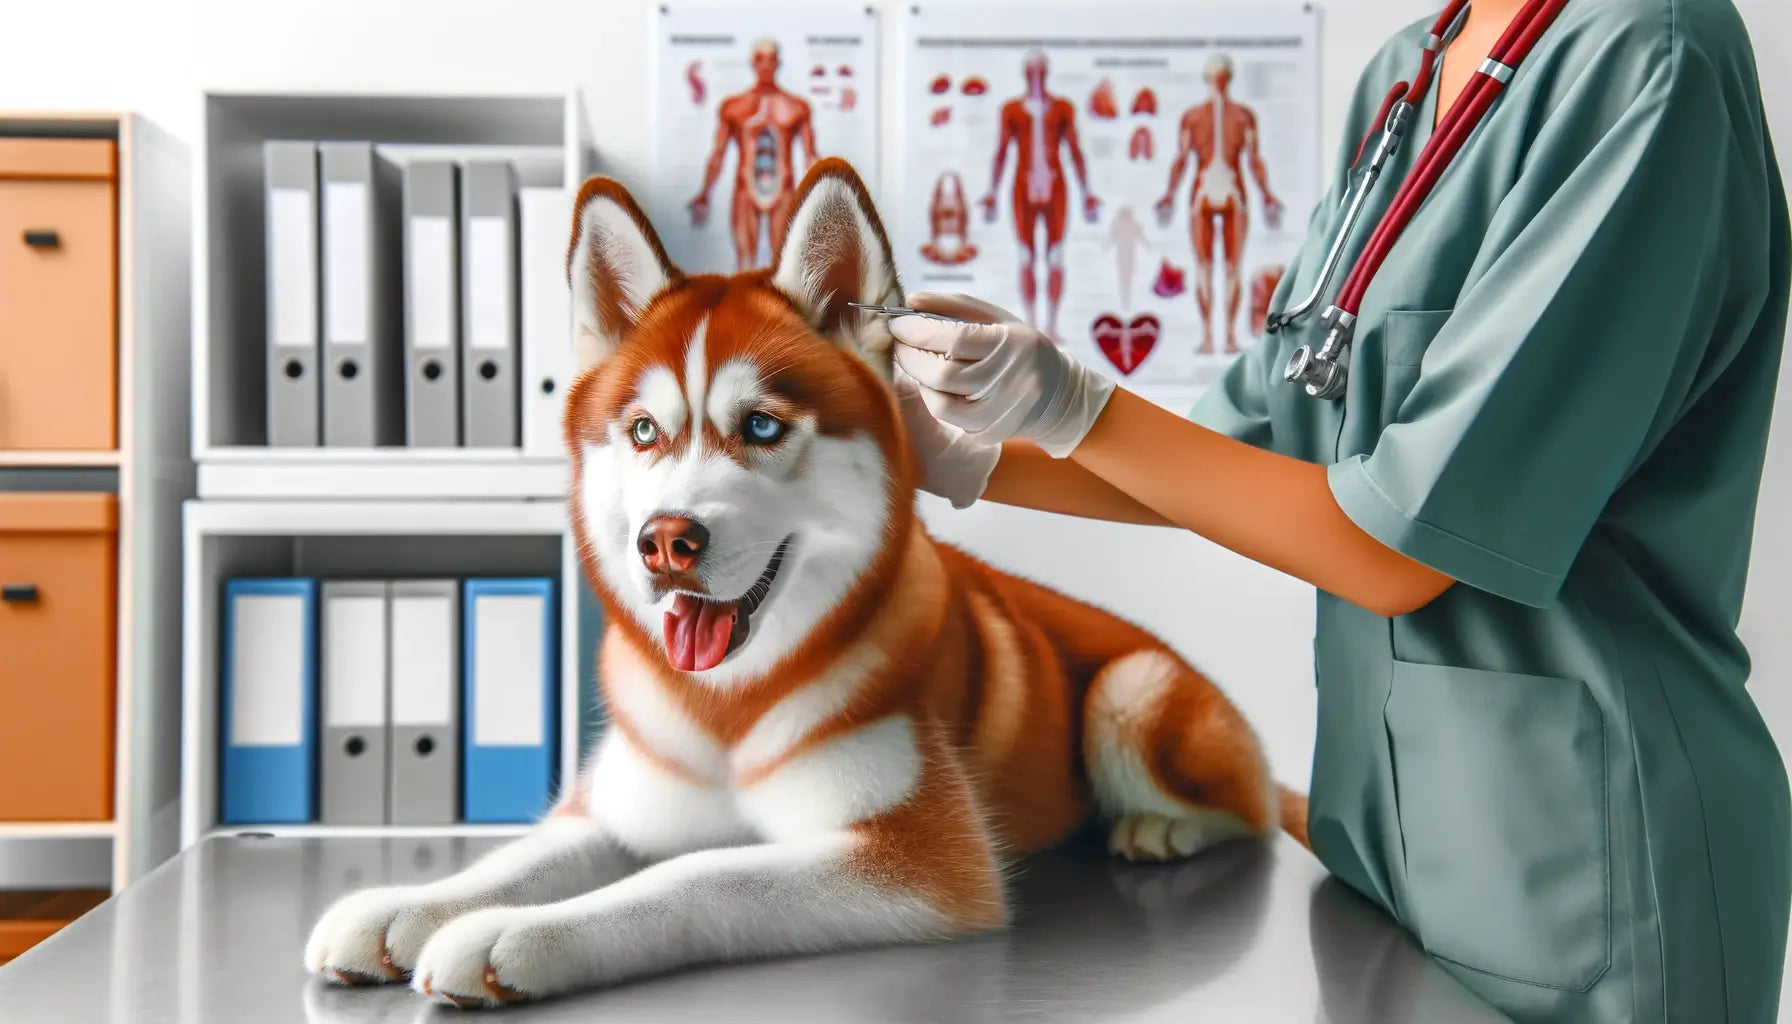 Image showing a Red Husky at a veterinary clinic undergoing a thorough health check.